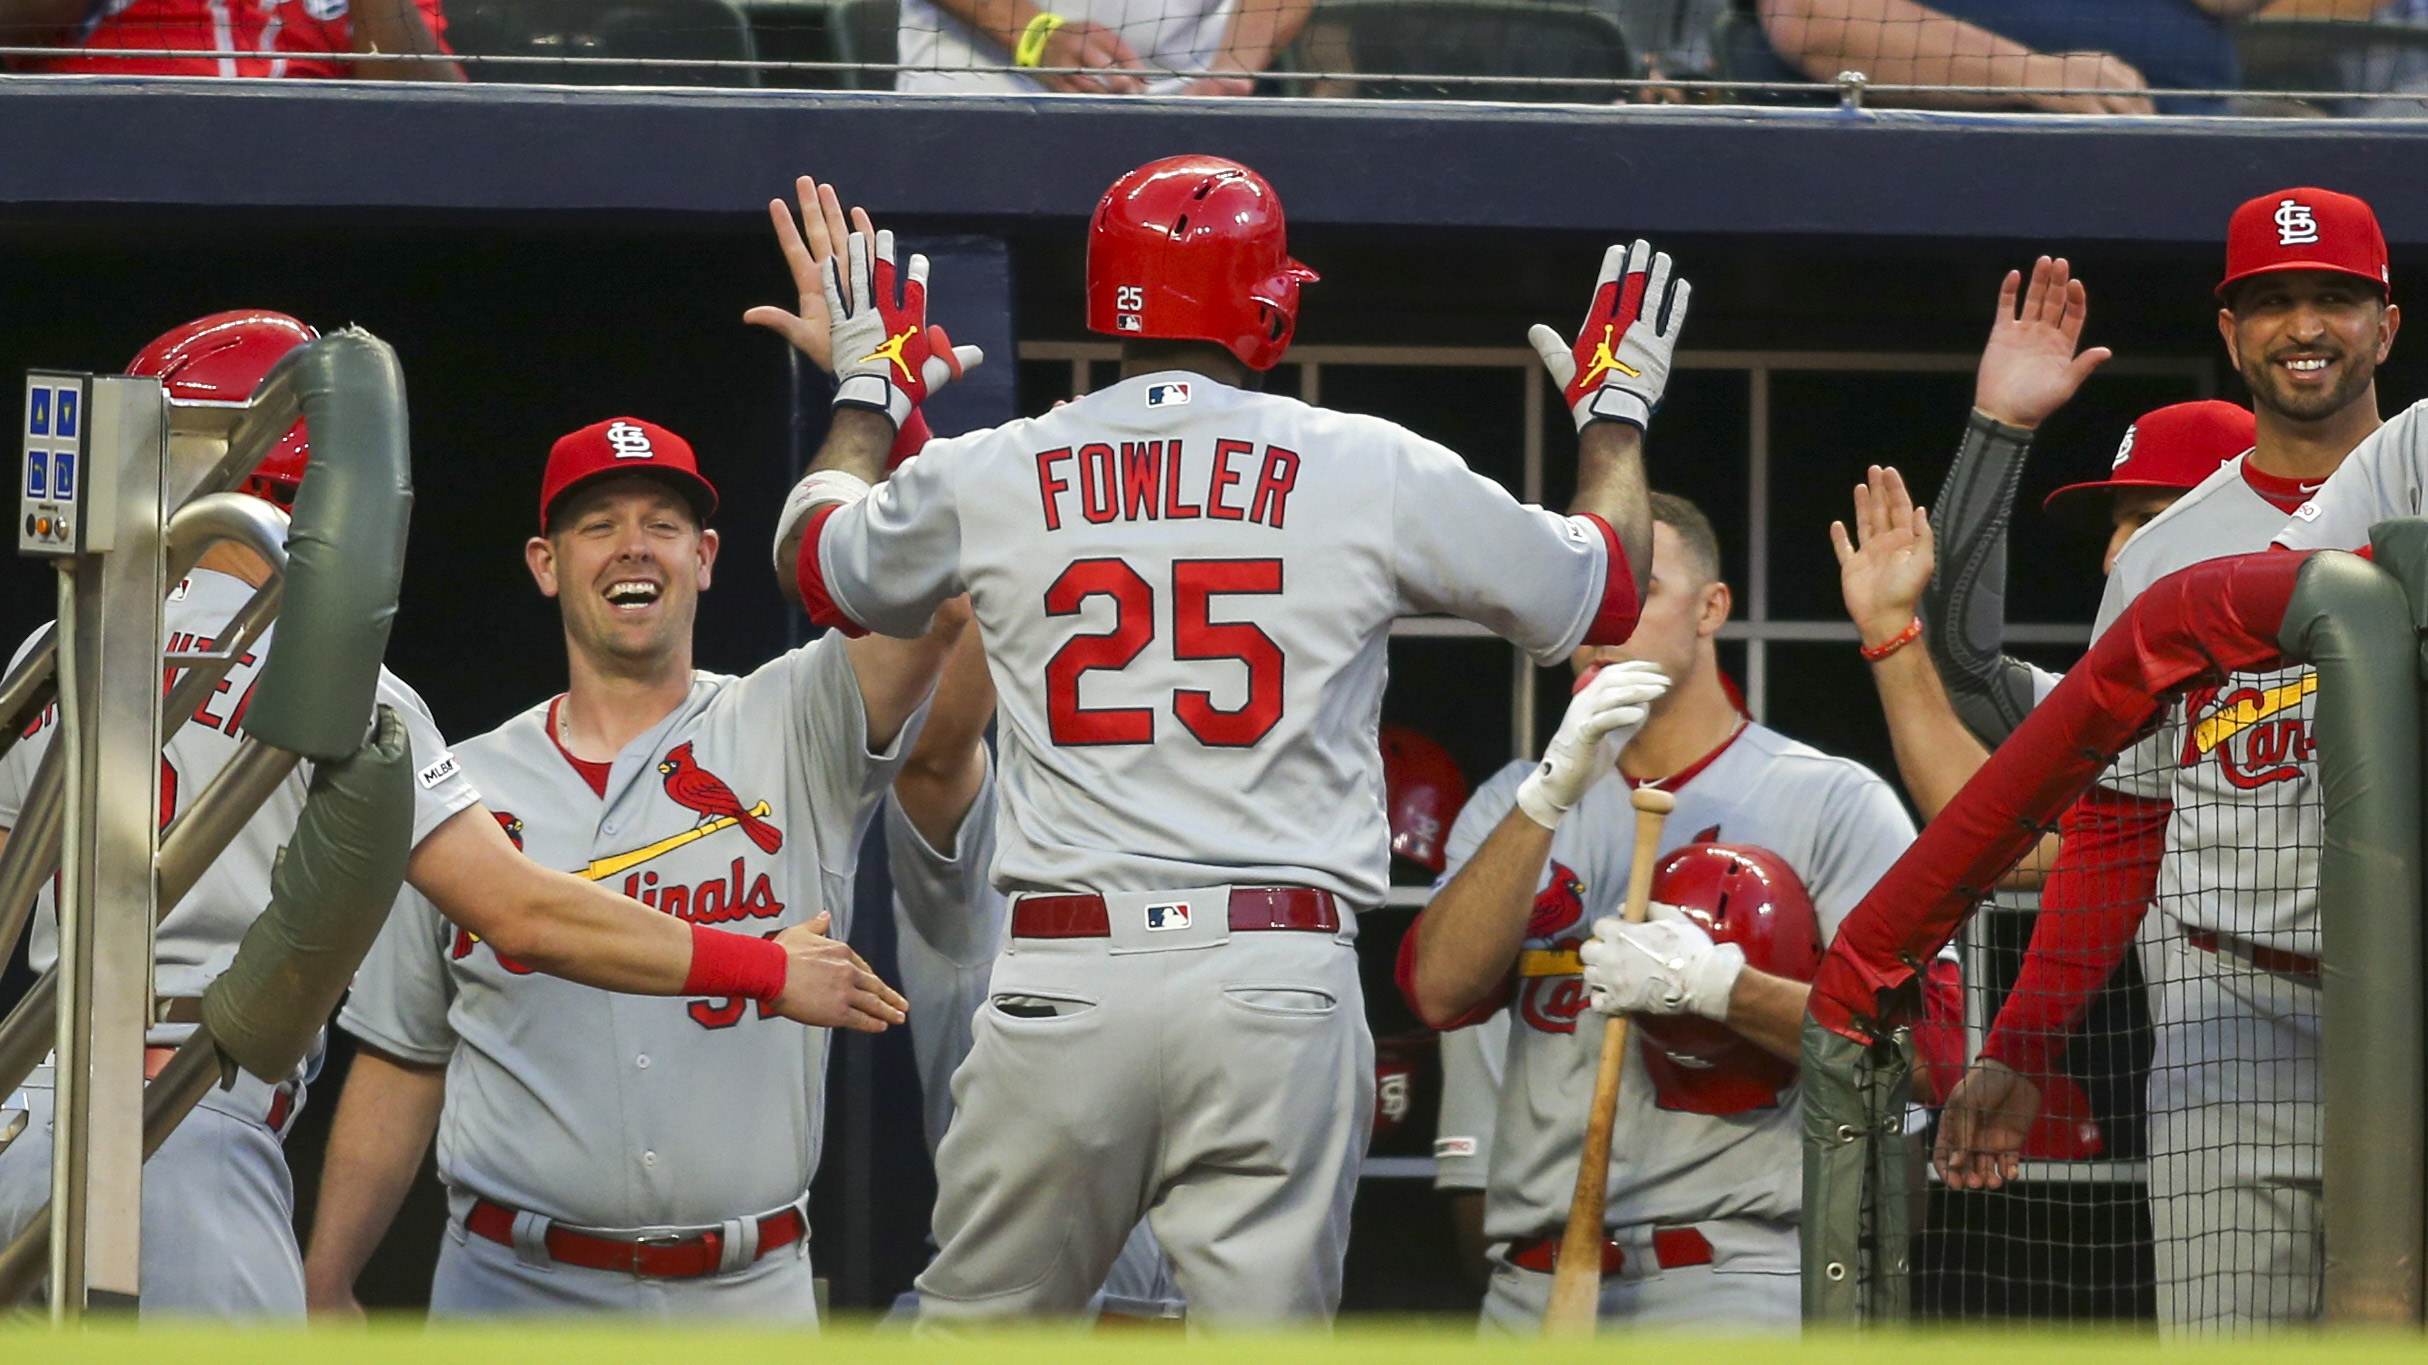 Cardinals launch four homers, dominate Braves in 14-3 win